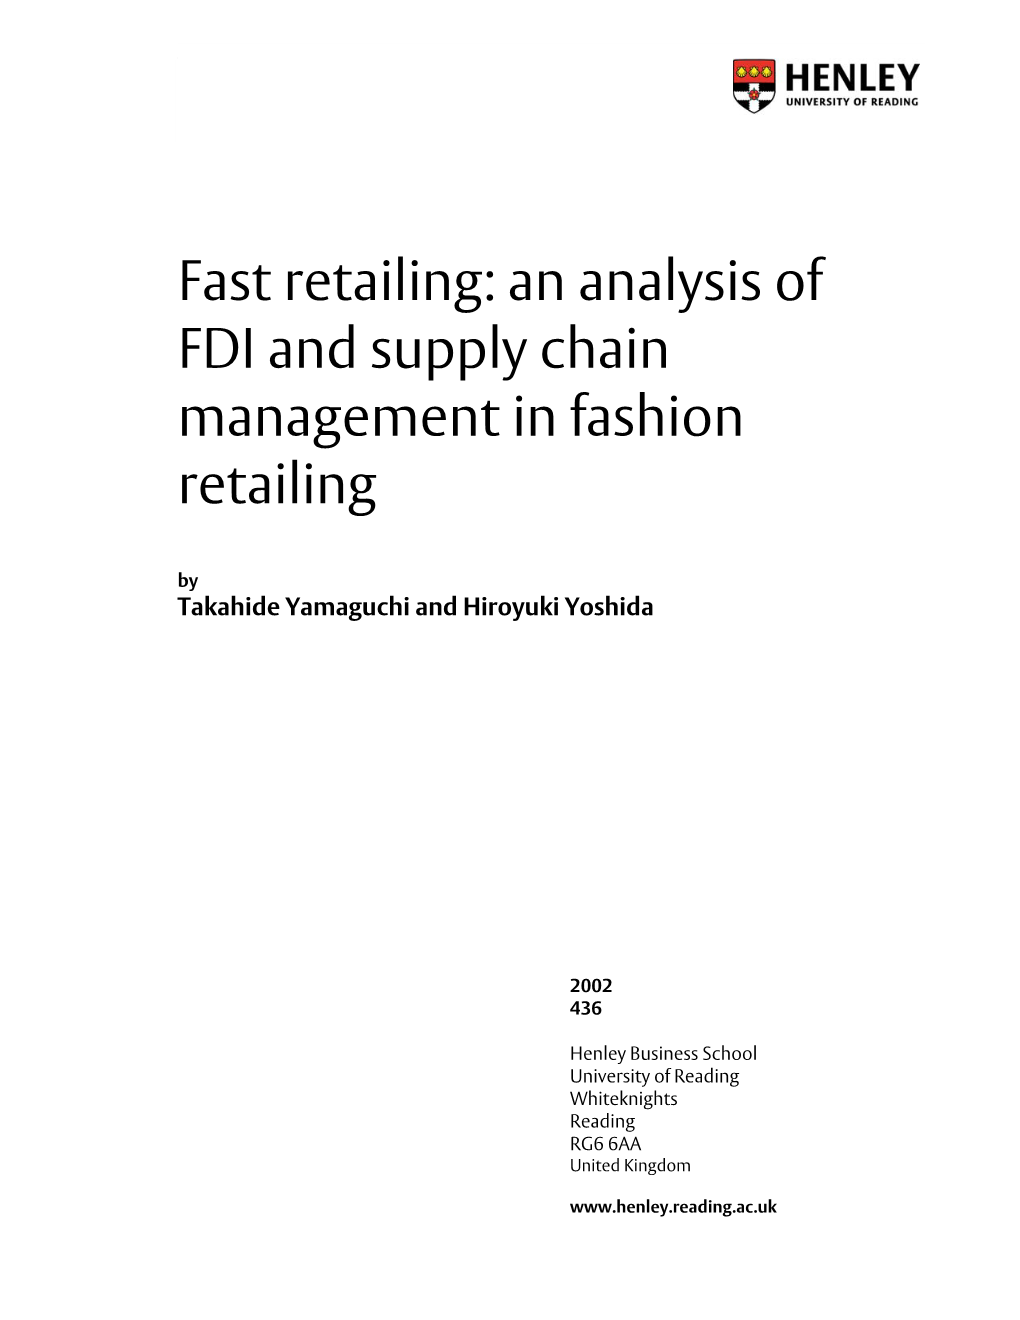 An Analysis of FDI and Supply Chain Management in Fashion Retailing